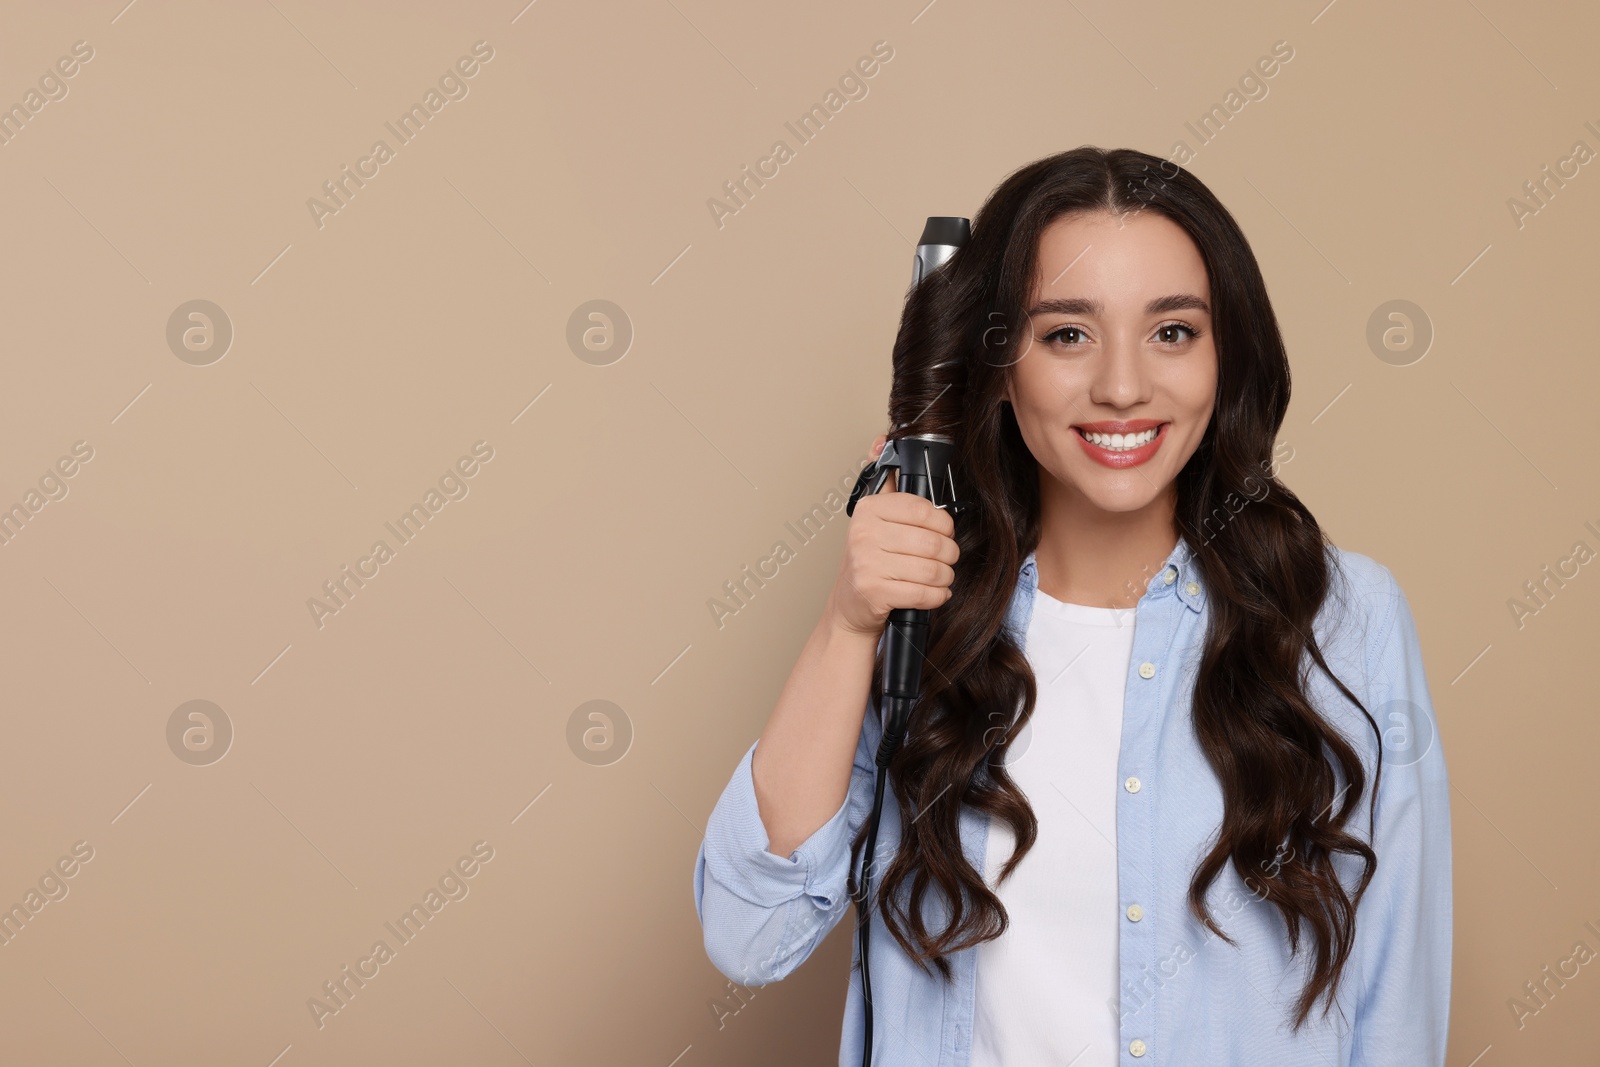 Photo of Happy woman using curling hair iron on beige background. Space for text